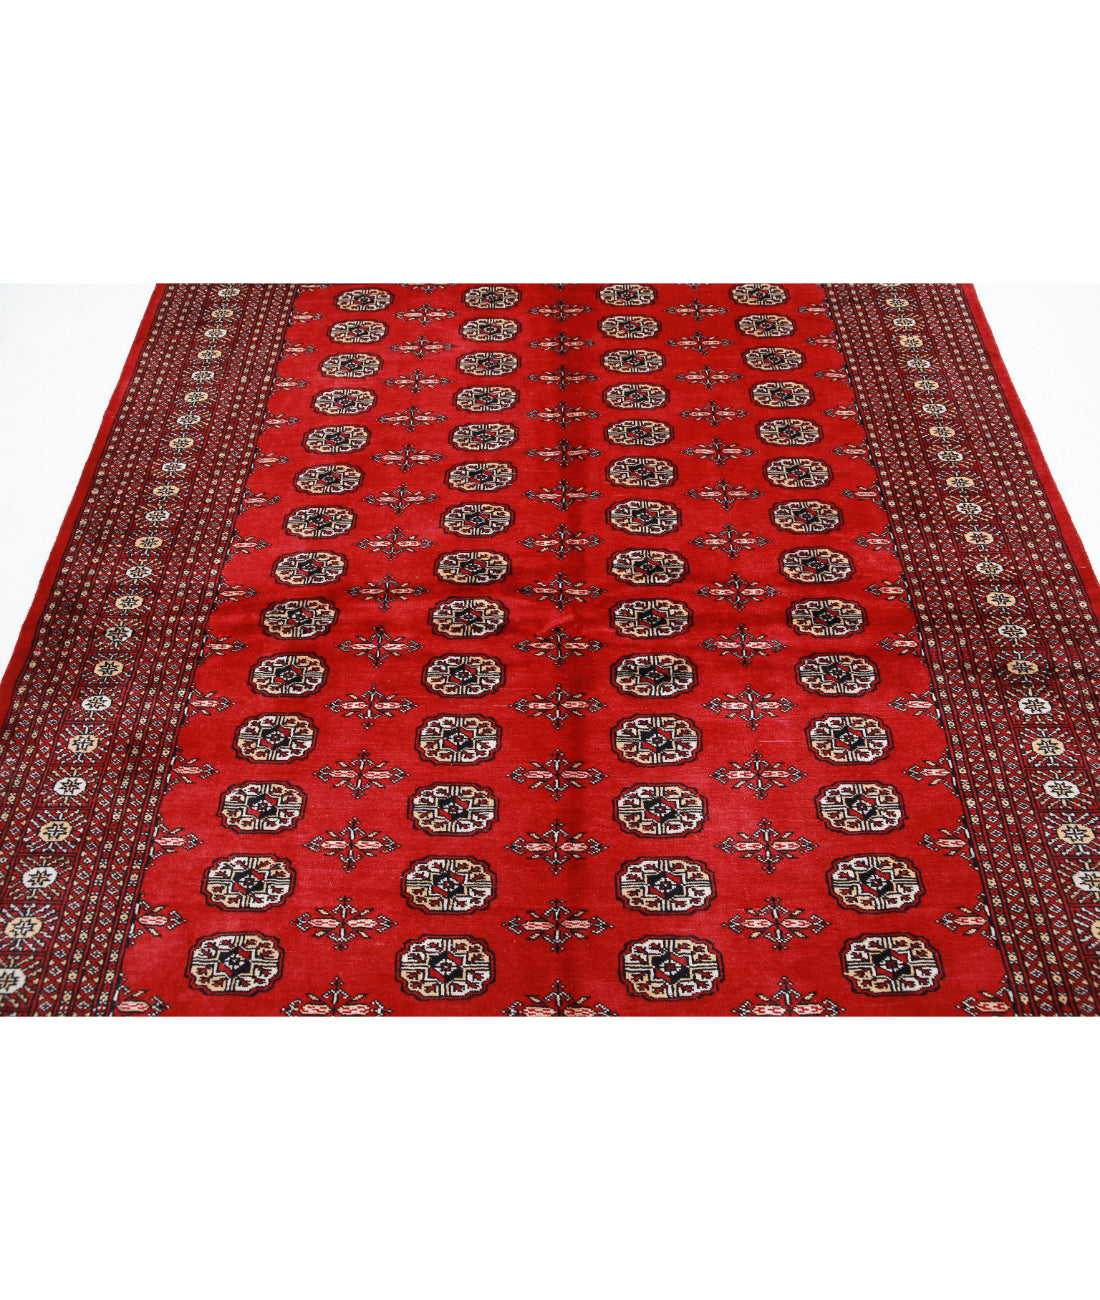 Hand Knotted Tribal Bokhara Wool Rug - 6'1'' x 8'7'' 6'1'' x 8'7'' (183 X 258) / Red / Black